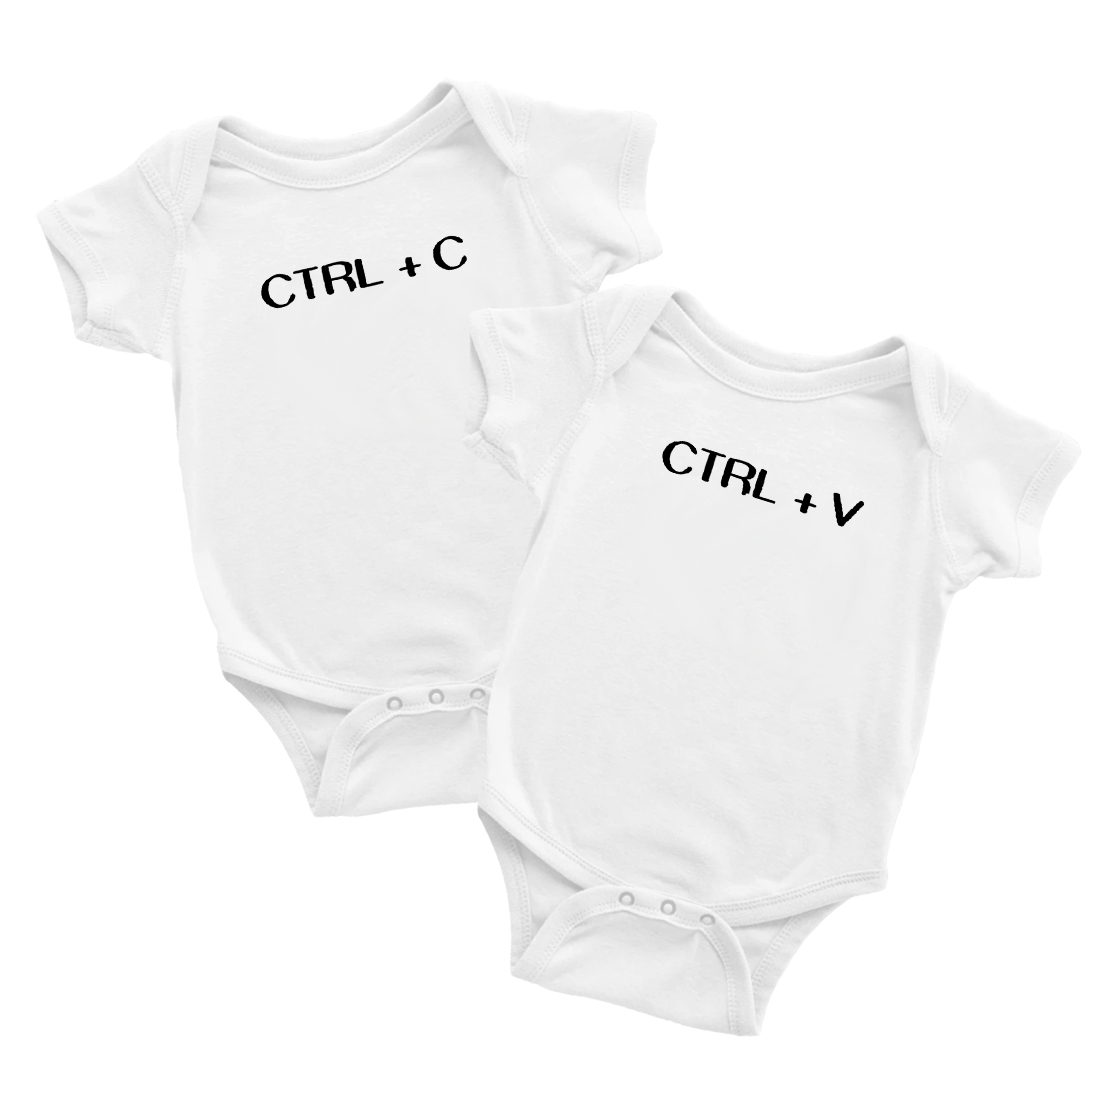 Twin Babys Funny Ctrl + C Ctrl + V Printed Infant Baby Cotton Bodysuits (White, 0-3M) - image 1 of 5